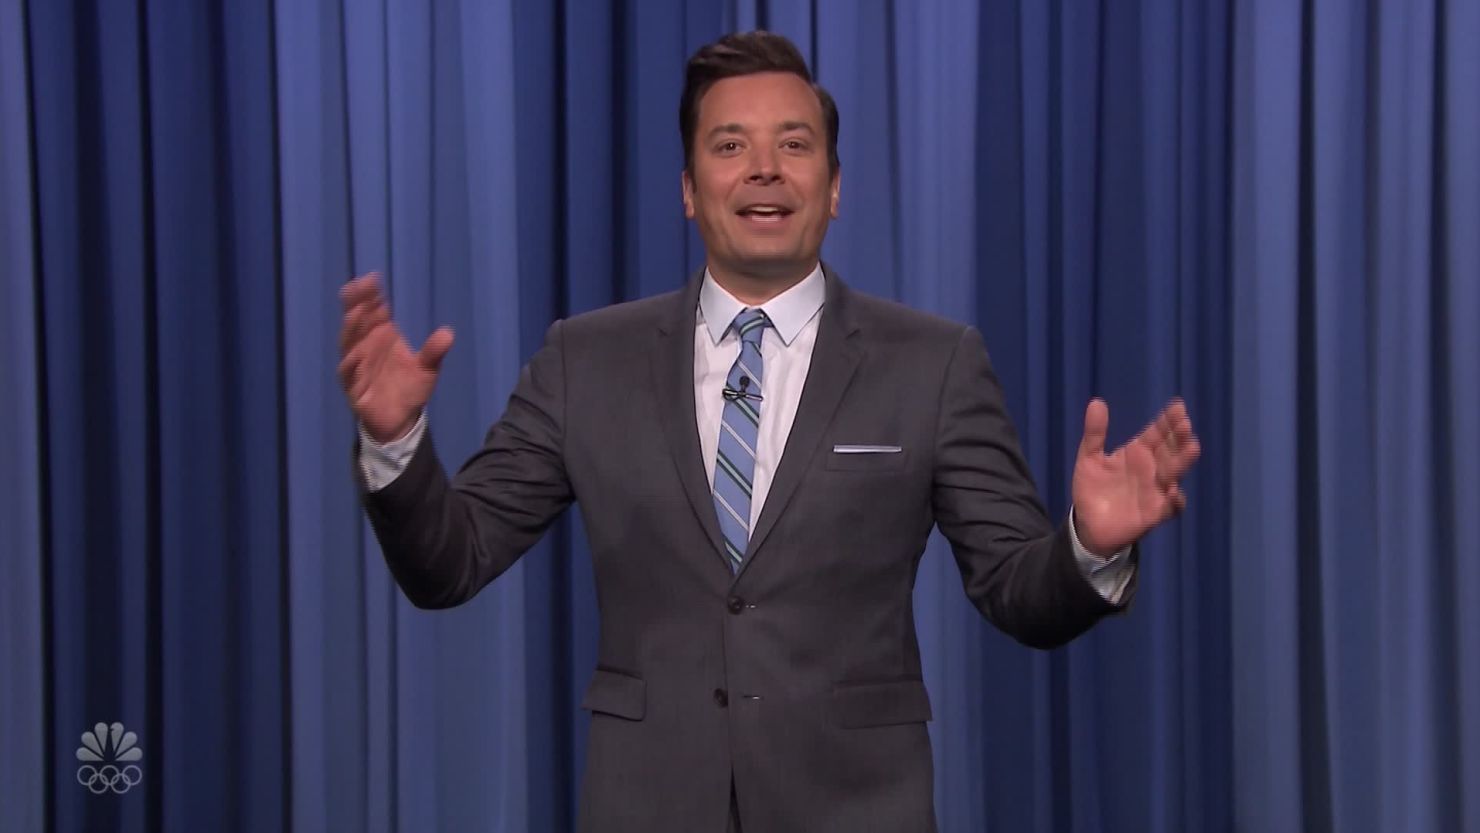 Jimmy Fallon is among celebrities who will record commencement speeches for spring graduates.